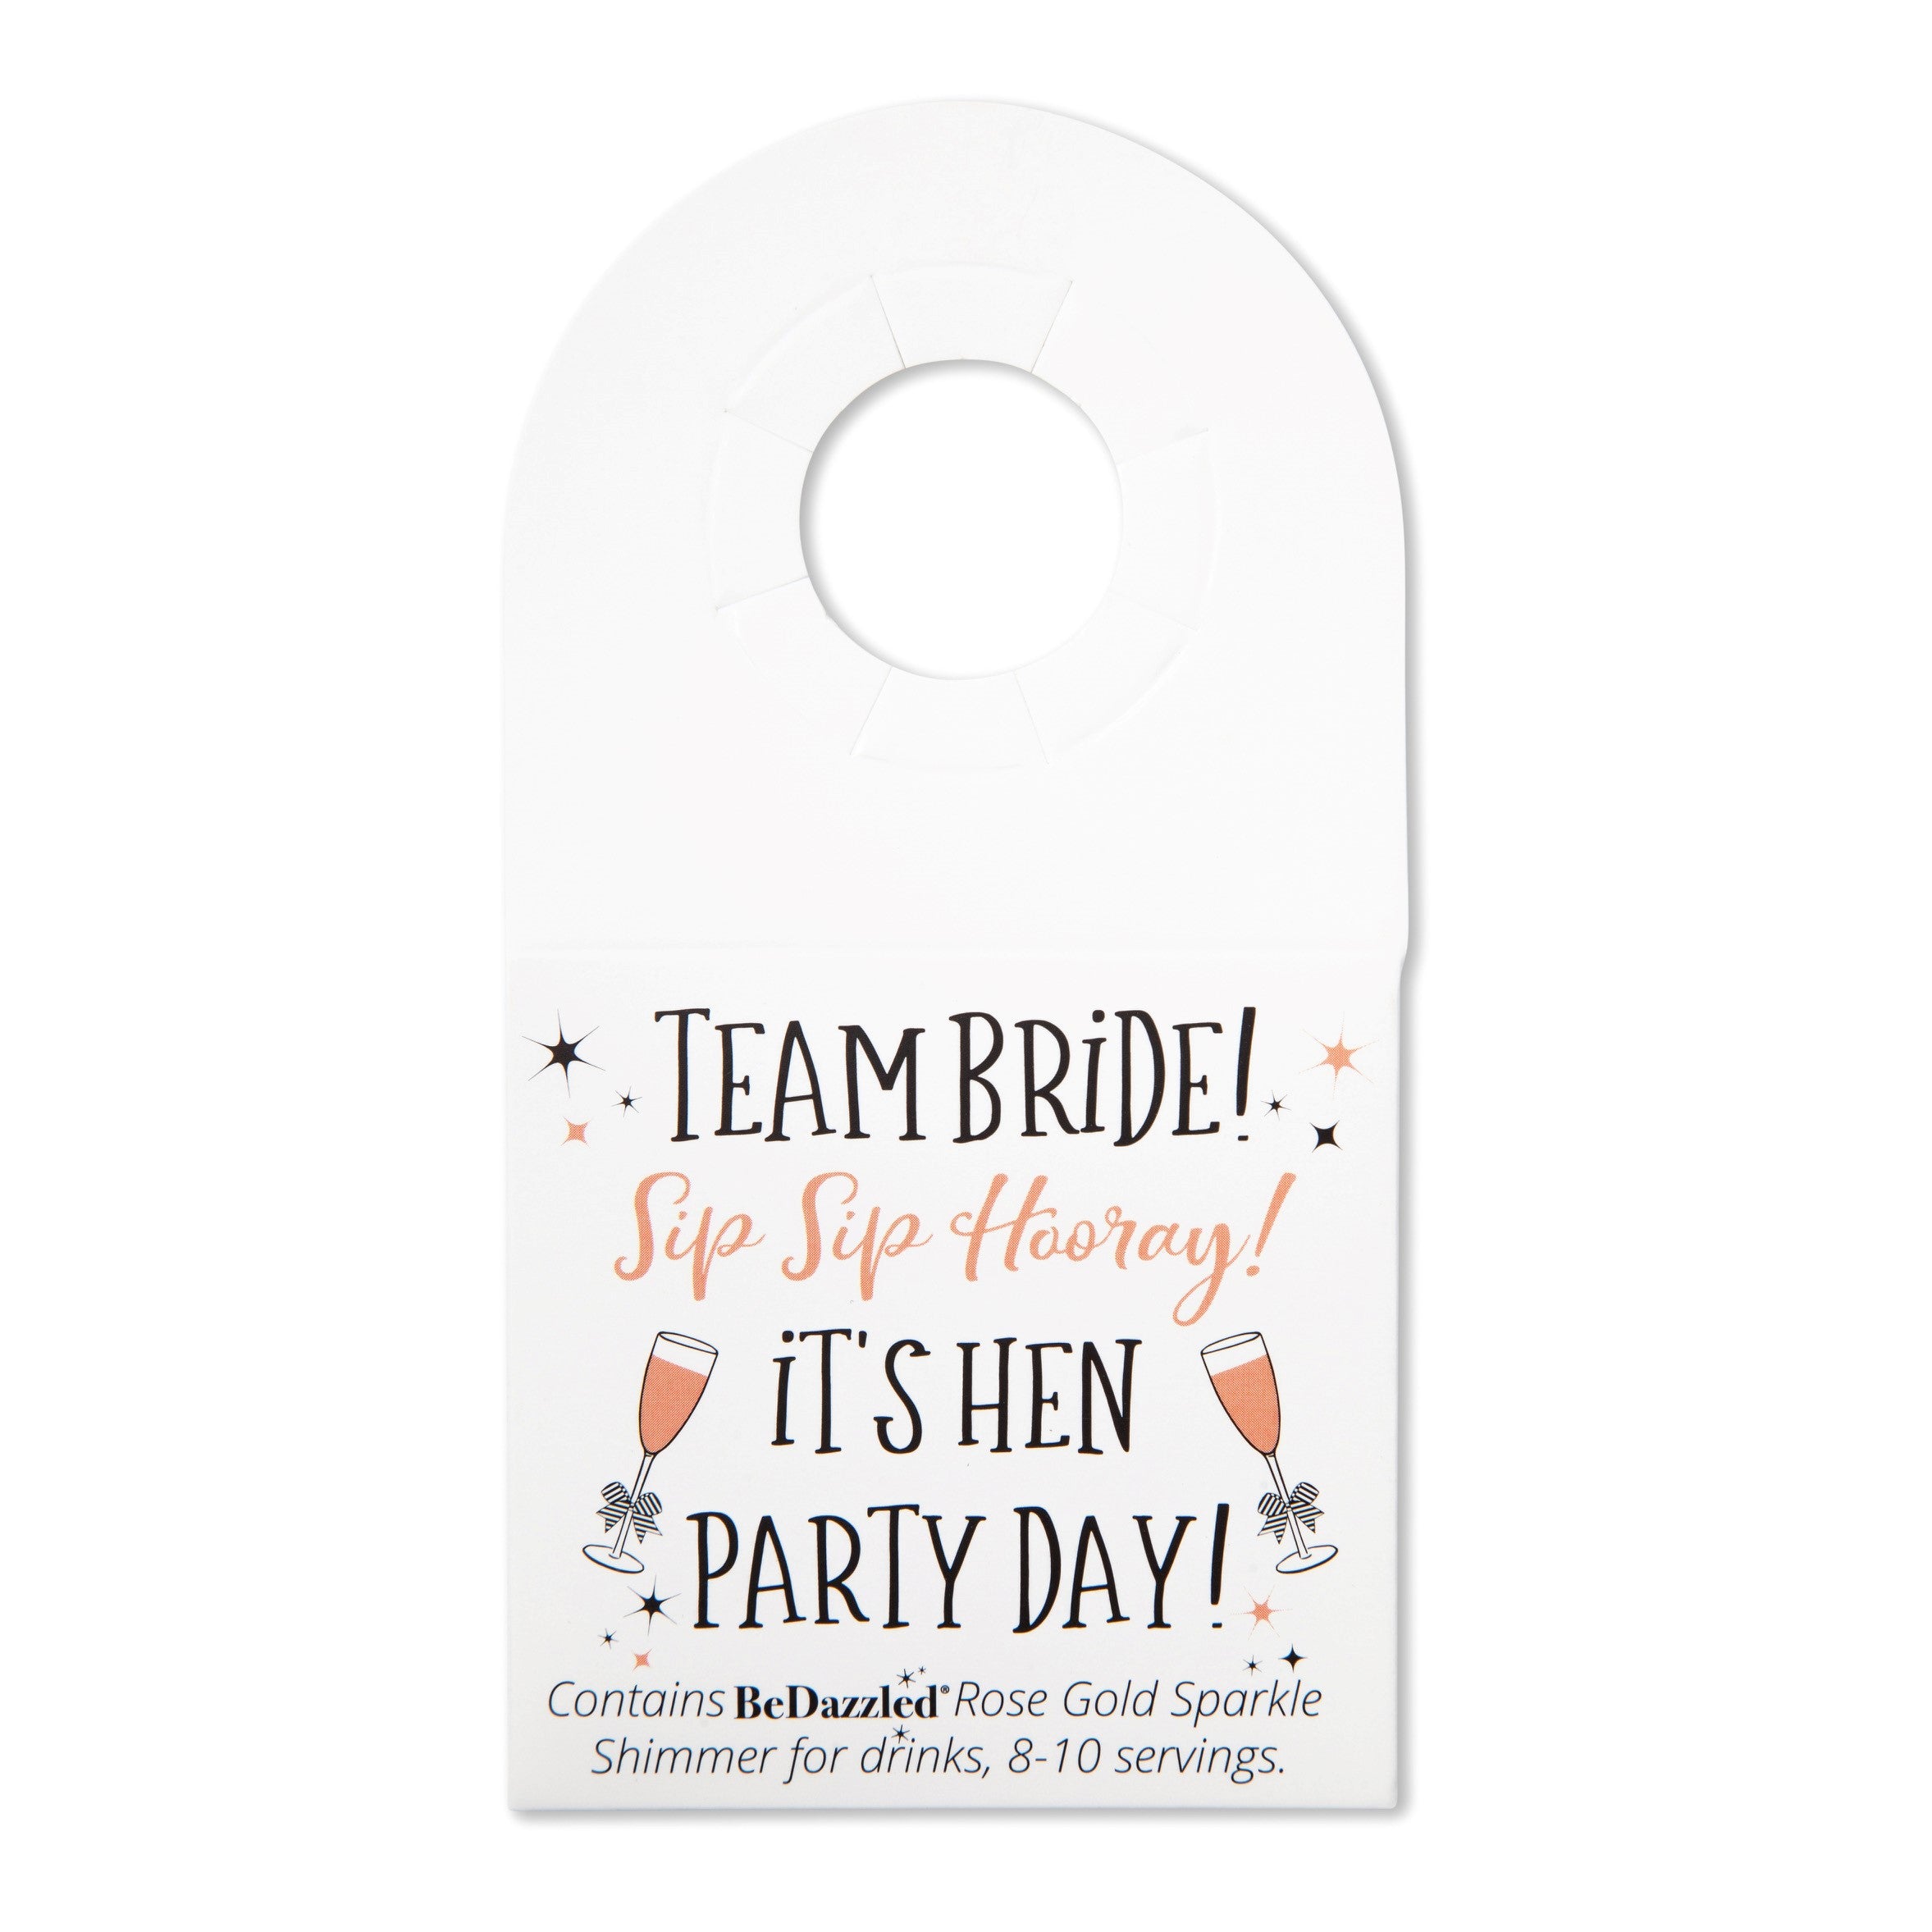 TEAM BRIDE...Sip sip hooray! It's Hen Party Day! - bottle neck gift tag containing ROSE GOLD shimmer